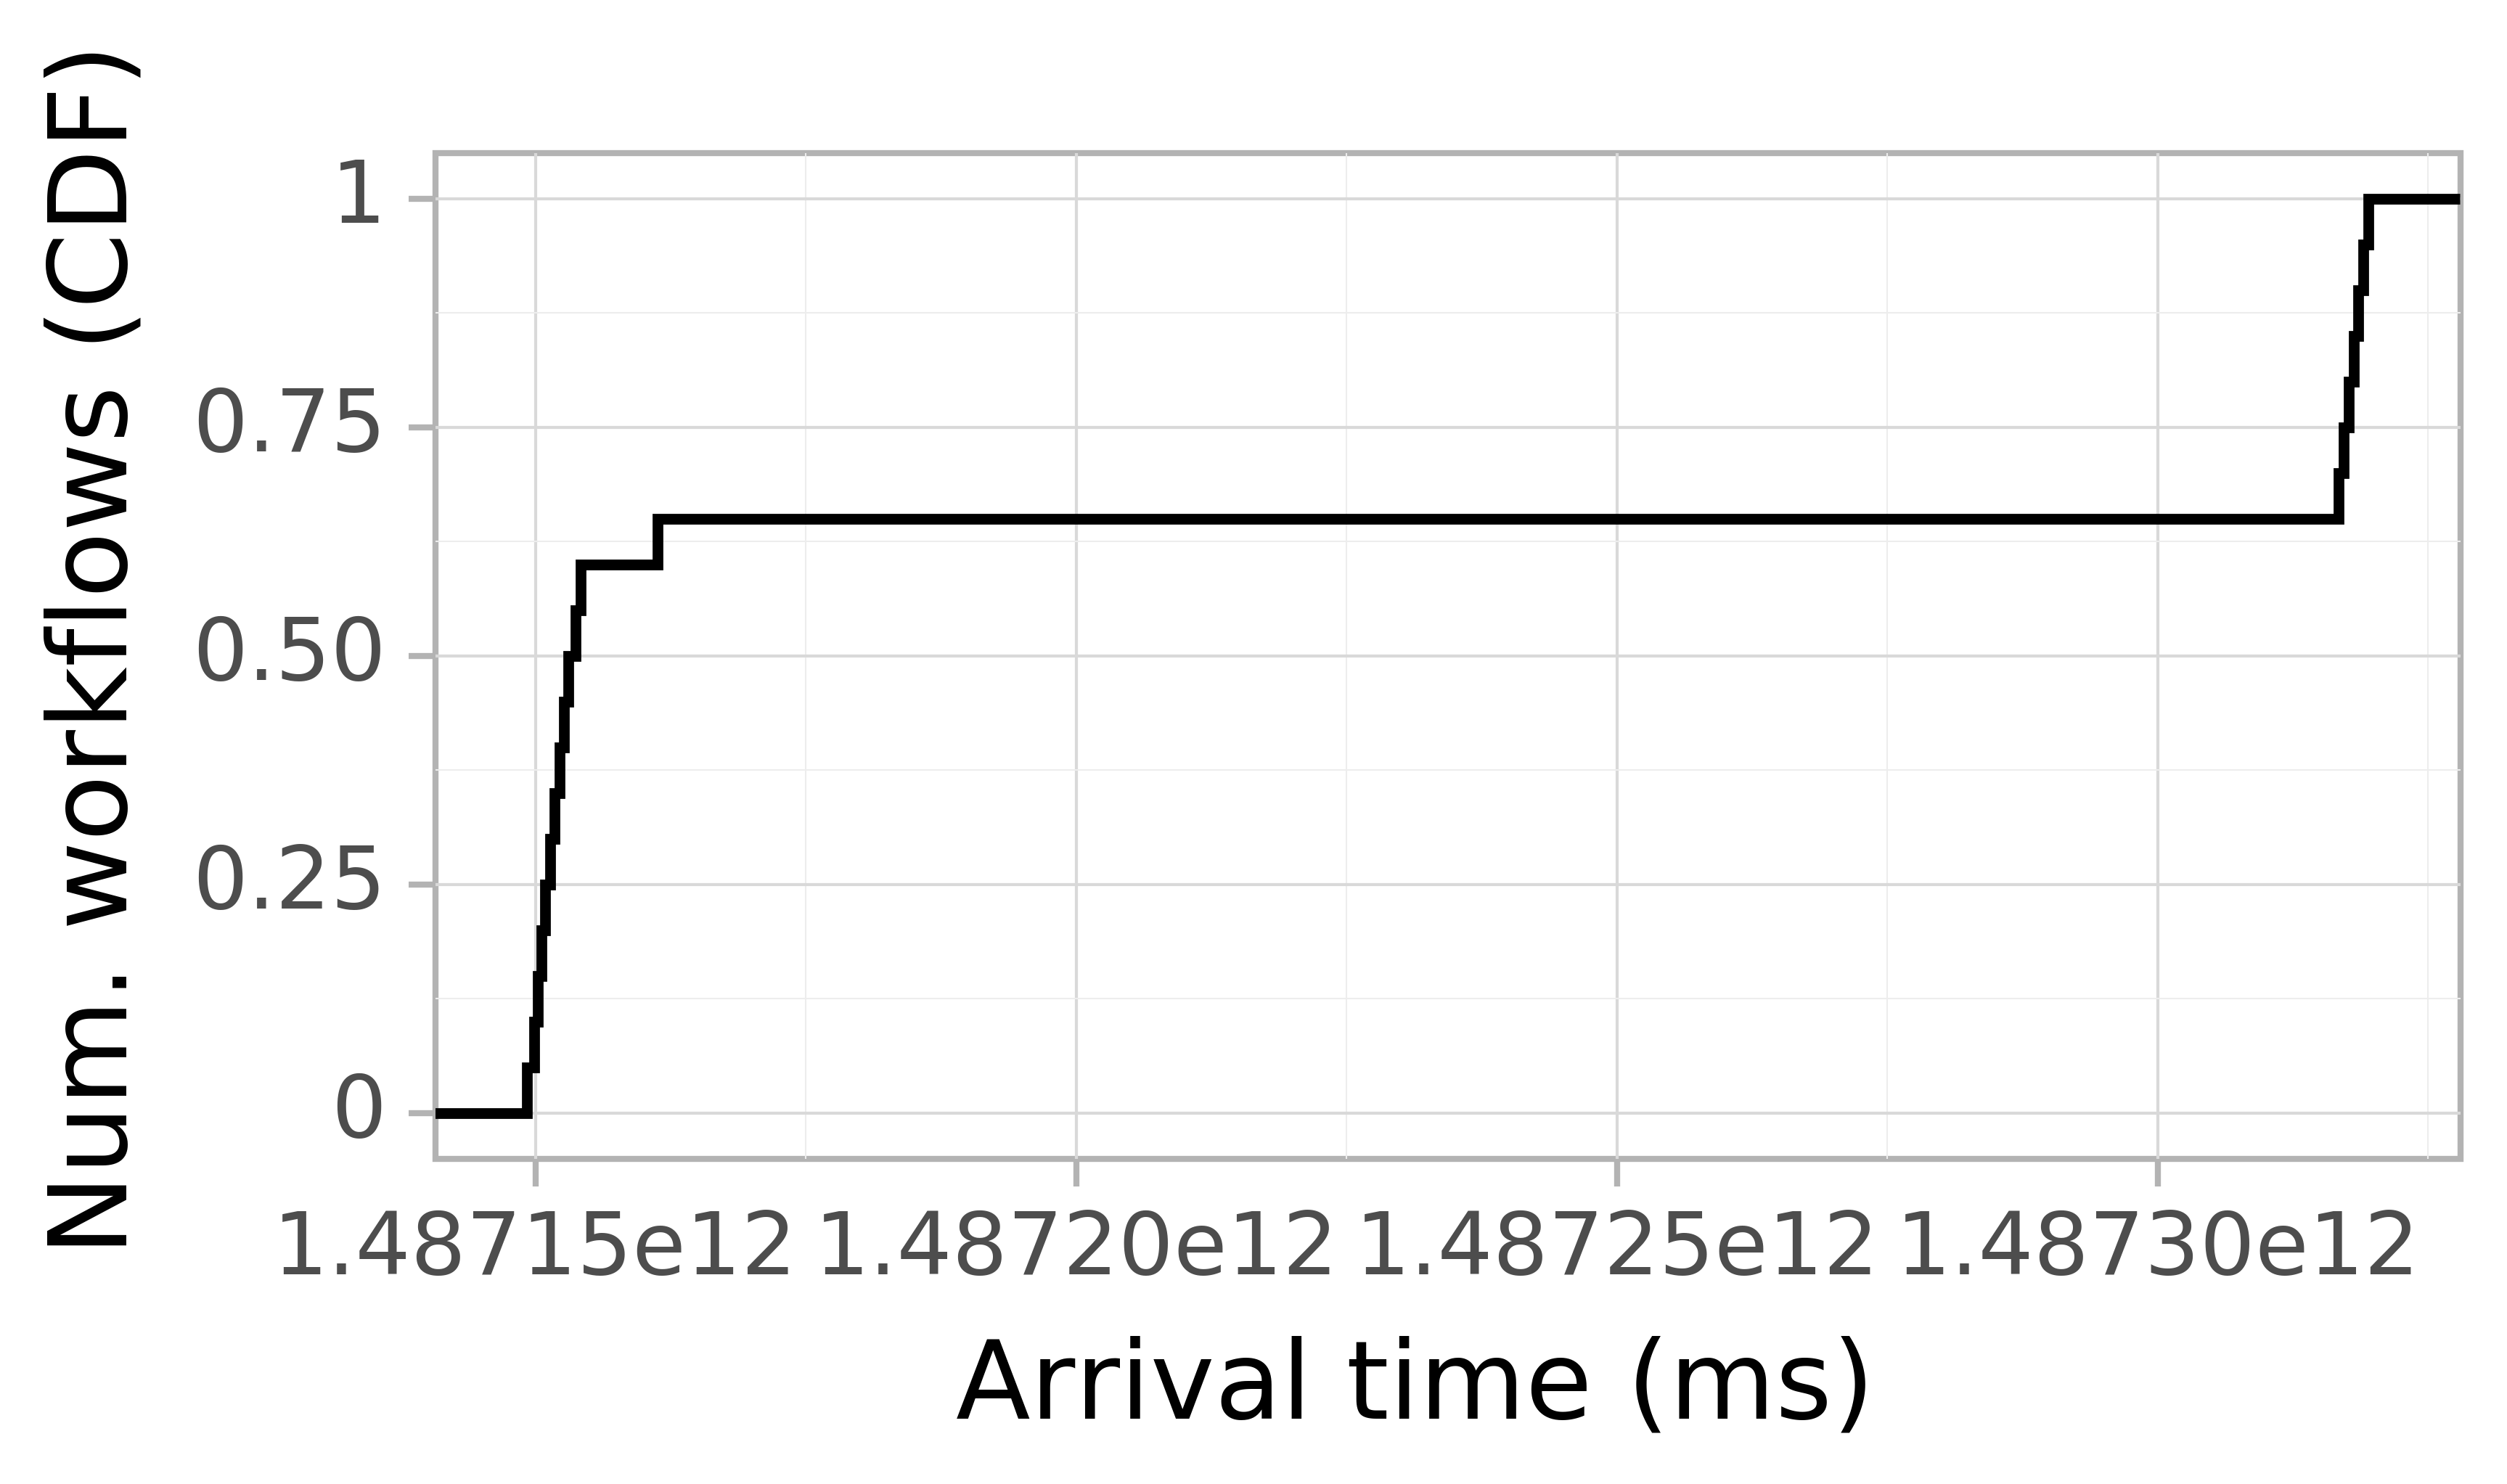 Job arrival CDF graph for the askalon-new_ee3 trace.